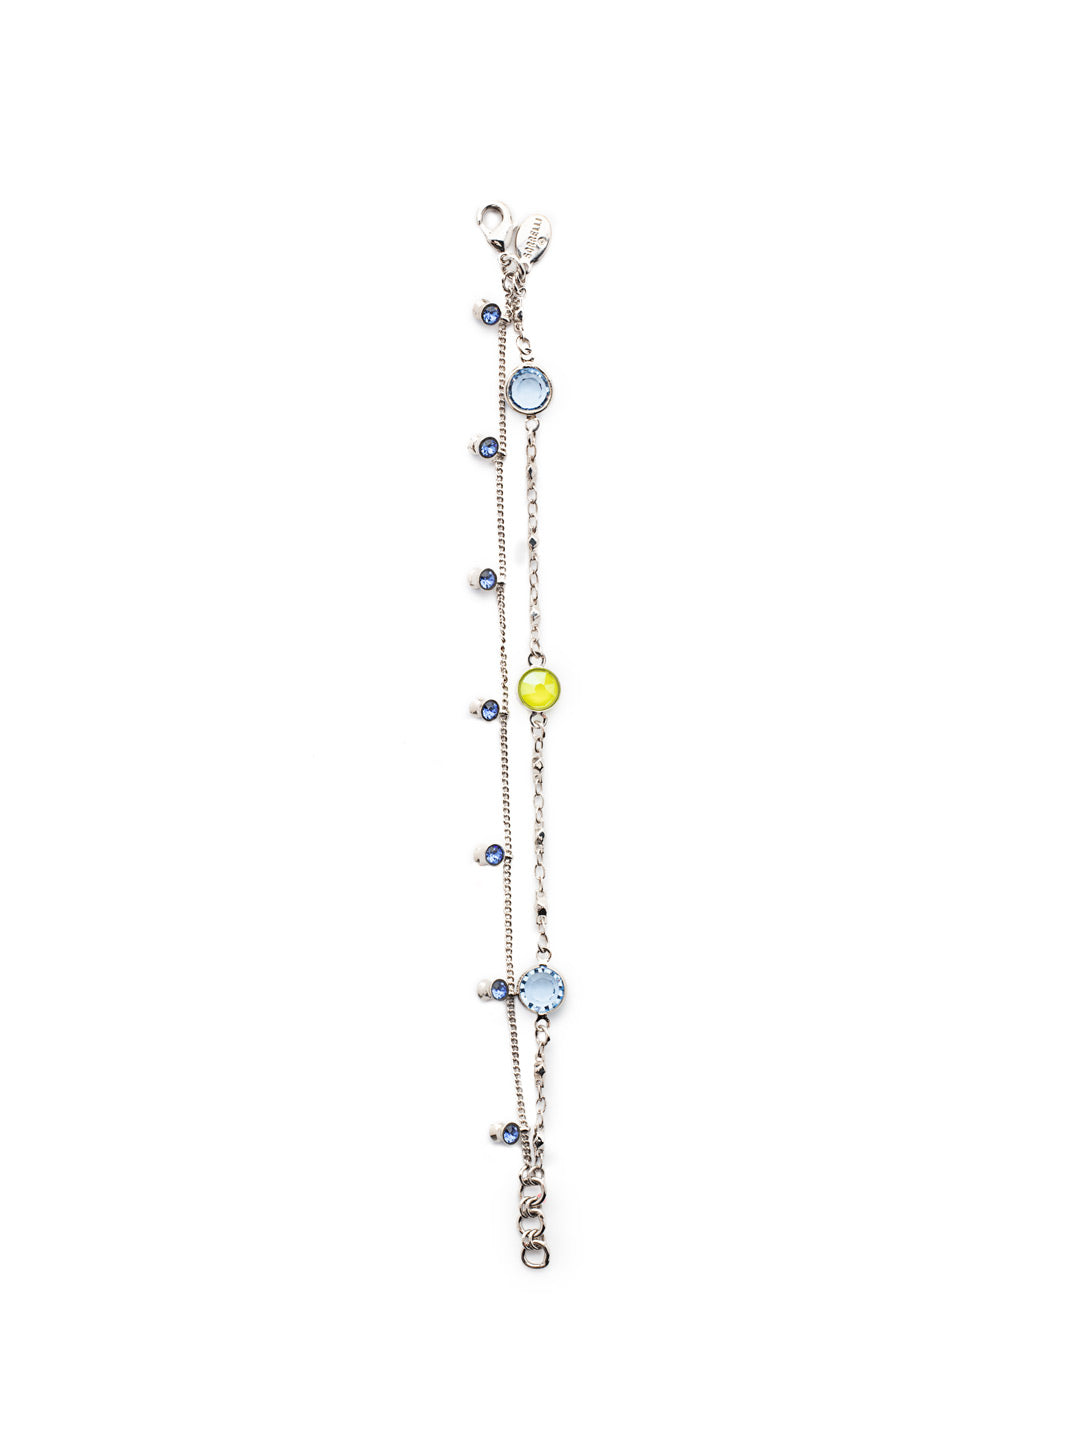 Dewdrop Layered Bracelet - BEK36RHBPY - <p>Add a dainty dash of crystal stones to your outfit for that something a bit extra special with this classic crystal layered bracelet. From Sorrelli's Blue Poppy collection in our Palladium Silver-tone finish.</p>